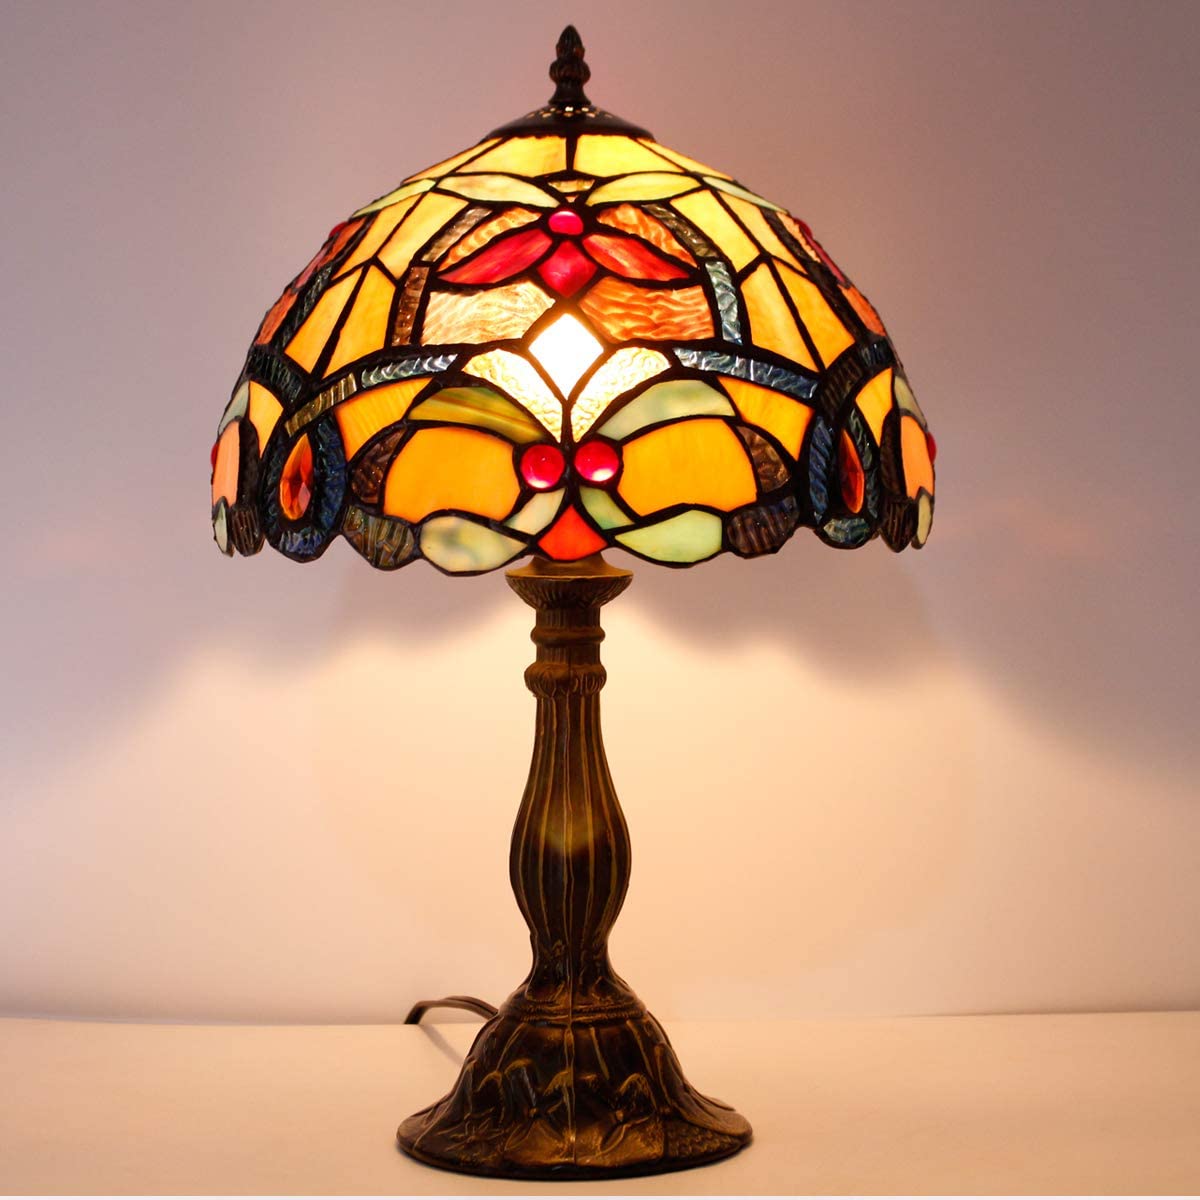 SHADY  Table Lamp Orange Stained Glass Flower Liaison Style Reading Desk Bedside Light 12X12X18 Inches Decor Bedroom Living Room Home Office S617 Series